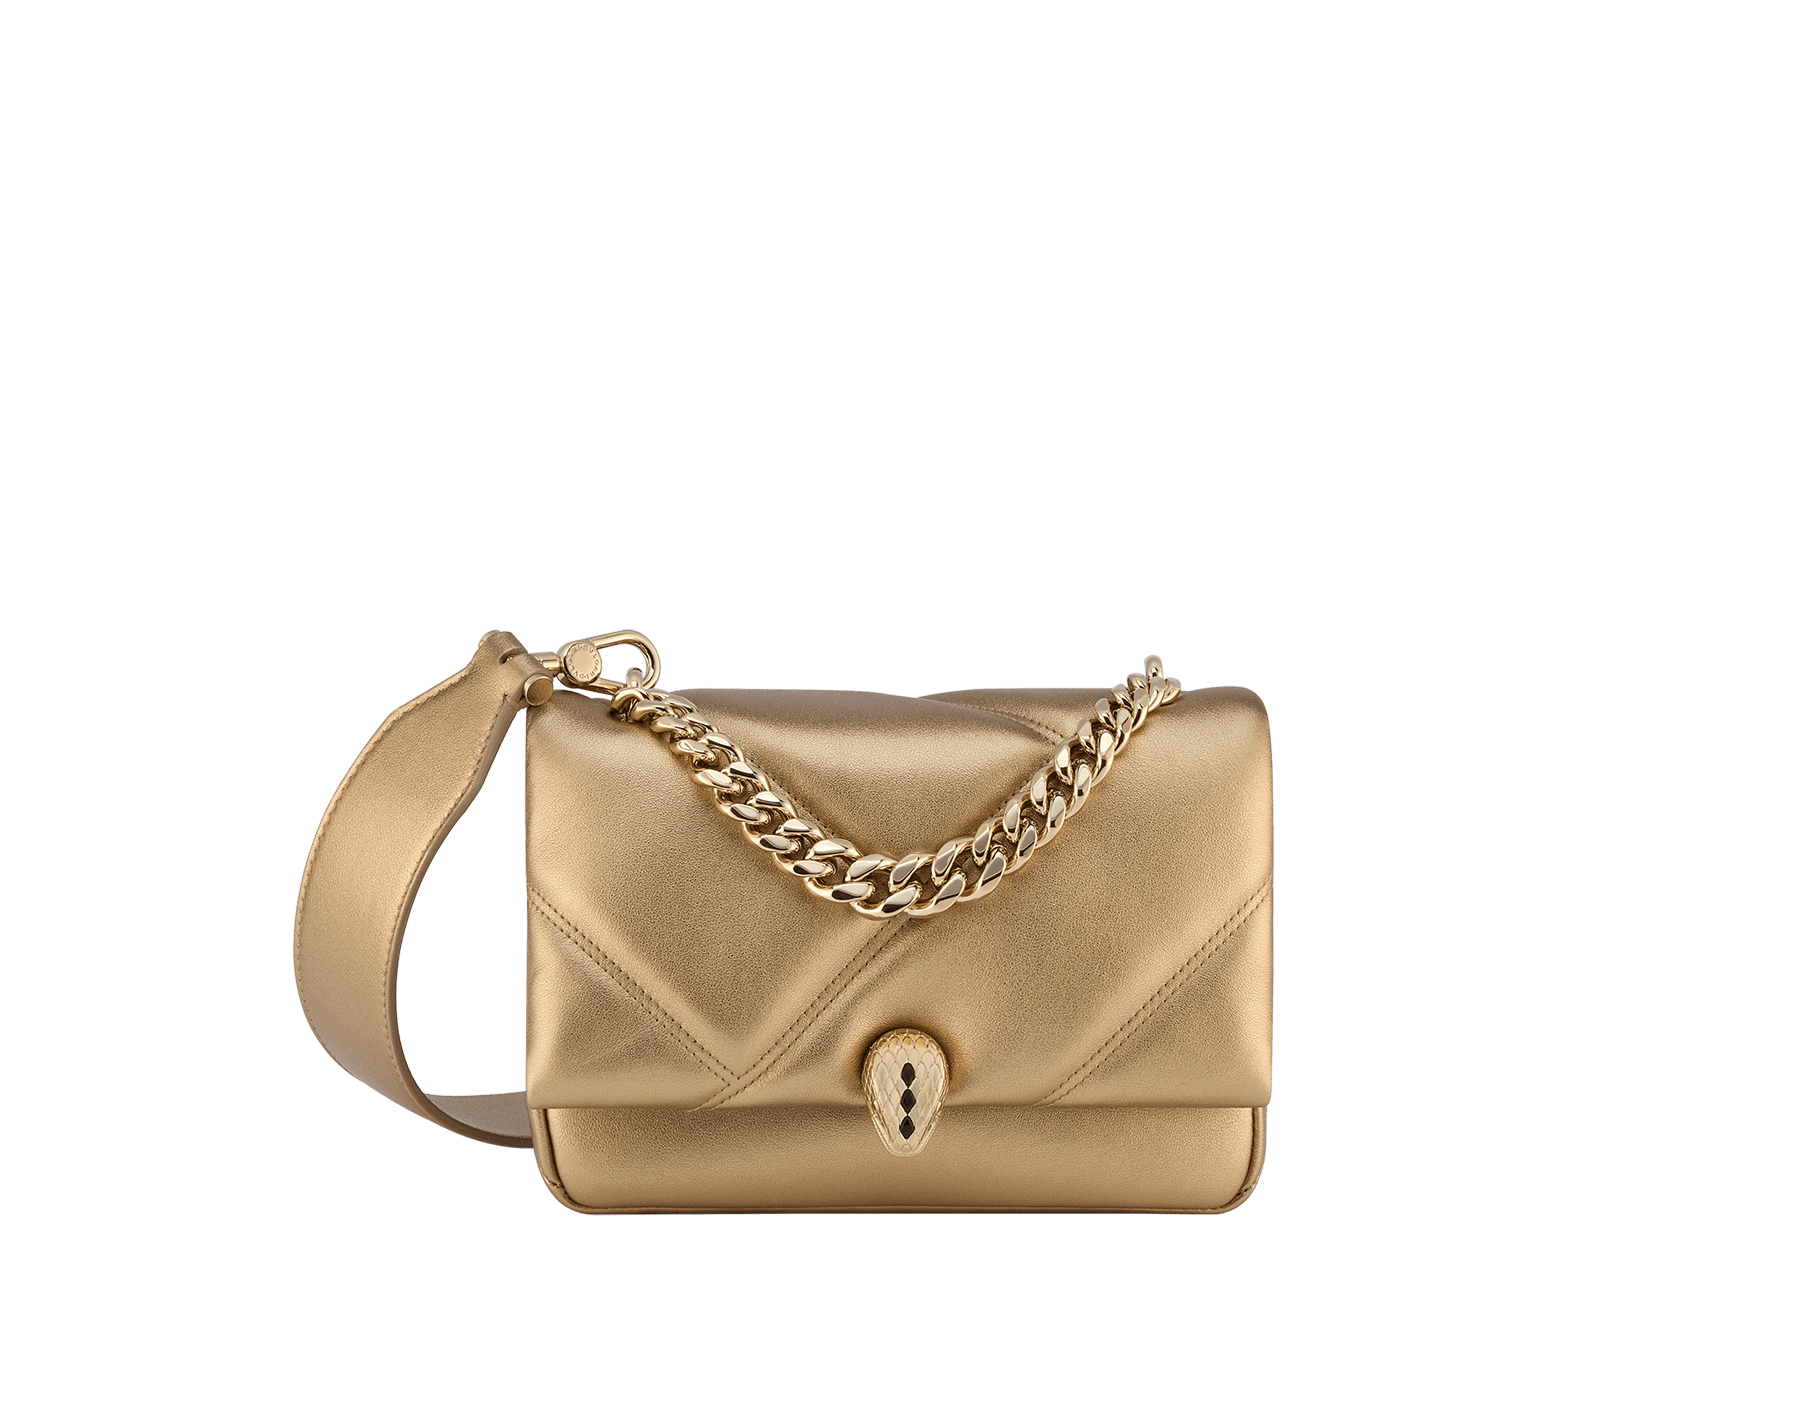 Serpenti Cabochon Maxi Chain mini crossbody bag in soft flash diamond calf leather with maxi graphic quilted motif and deep jade green nappa leather lining. Captivating snakehead magnetic closure in light gold-plated brass embellished with white mother-of-pearl scales and red enamel eyes. 1164-NSMa image 1